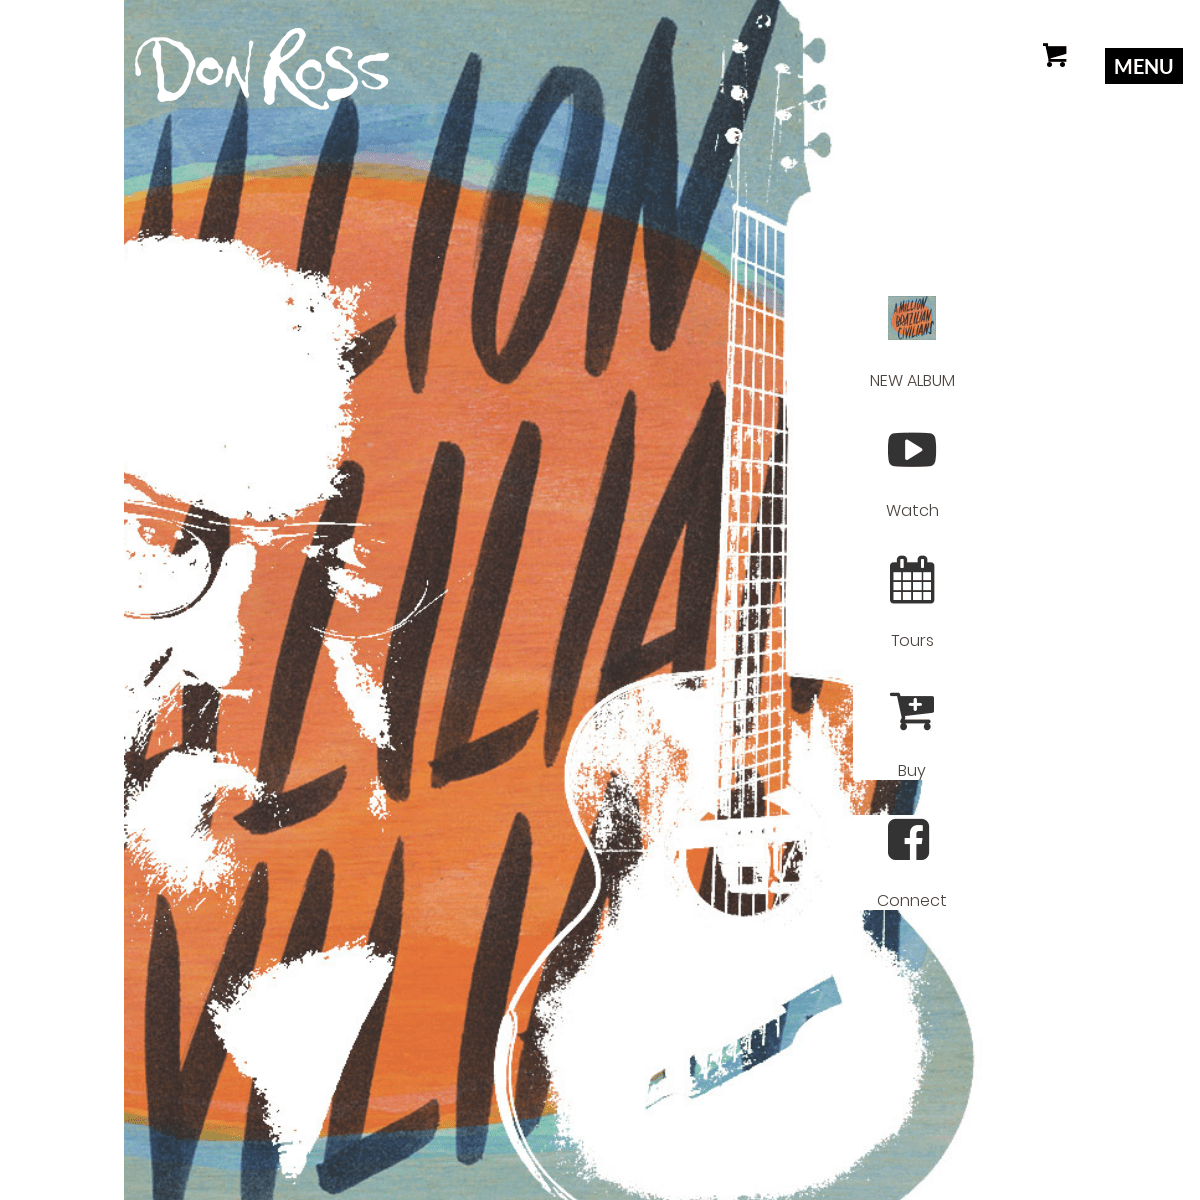 Home - Promo Cover - Don Ross Online